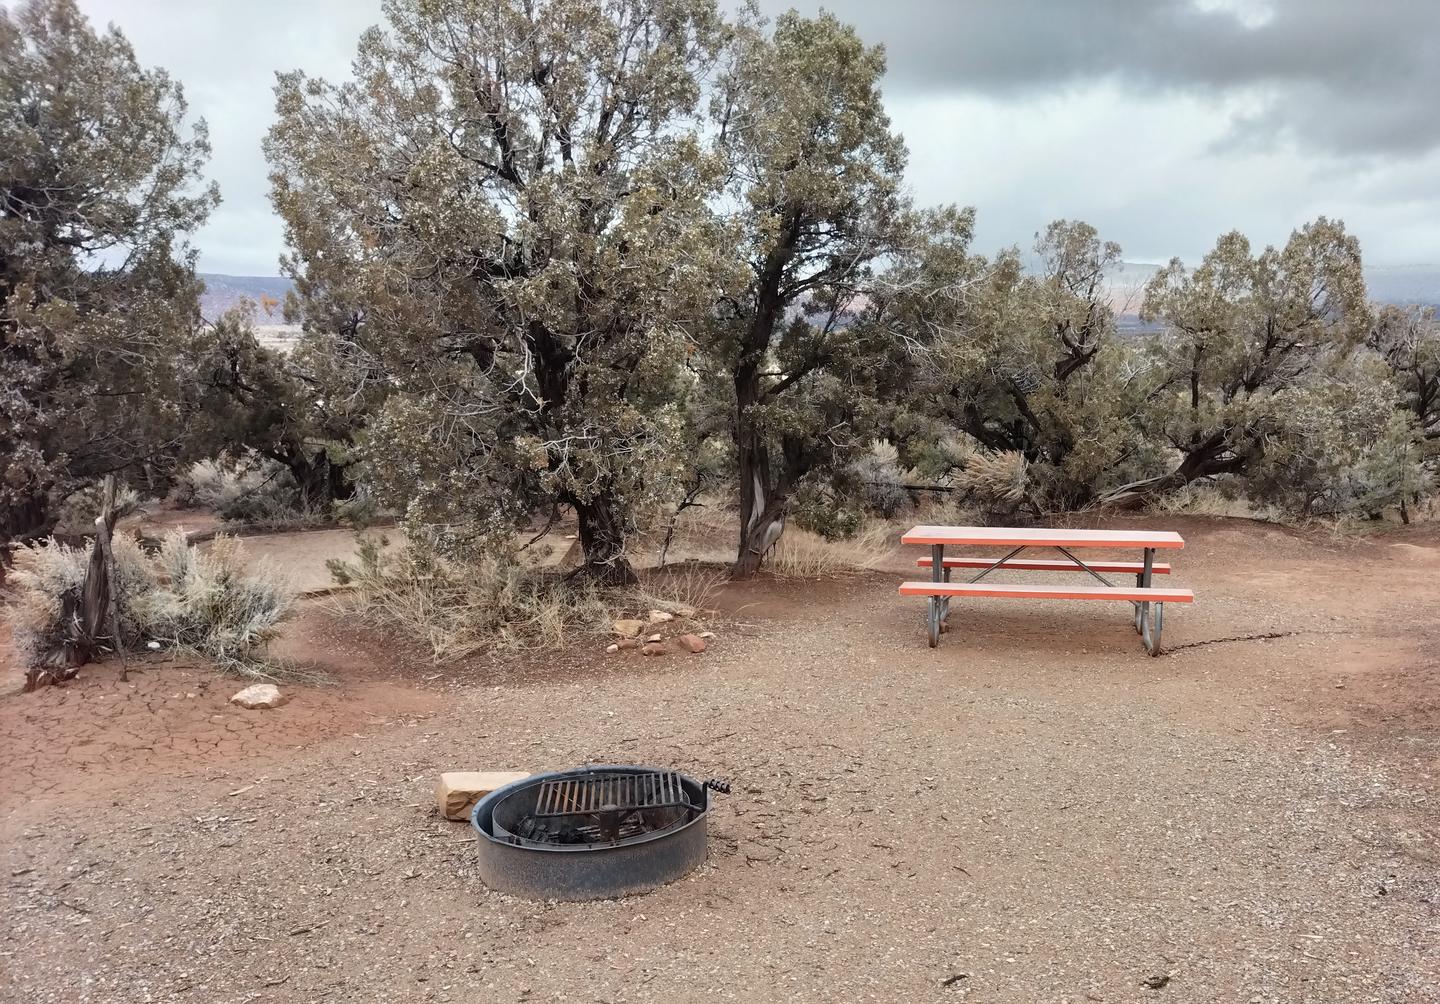 Picnic table and metal fire ring at Site 3Site 3 has a tent pad, picnic table, and a metal fire ring. The site is surrounded by pinon-juniper forest.